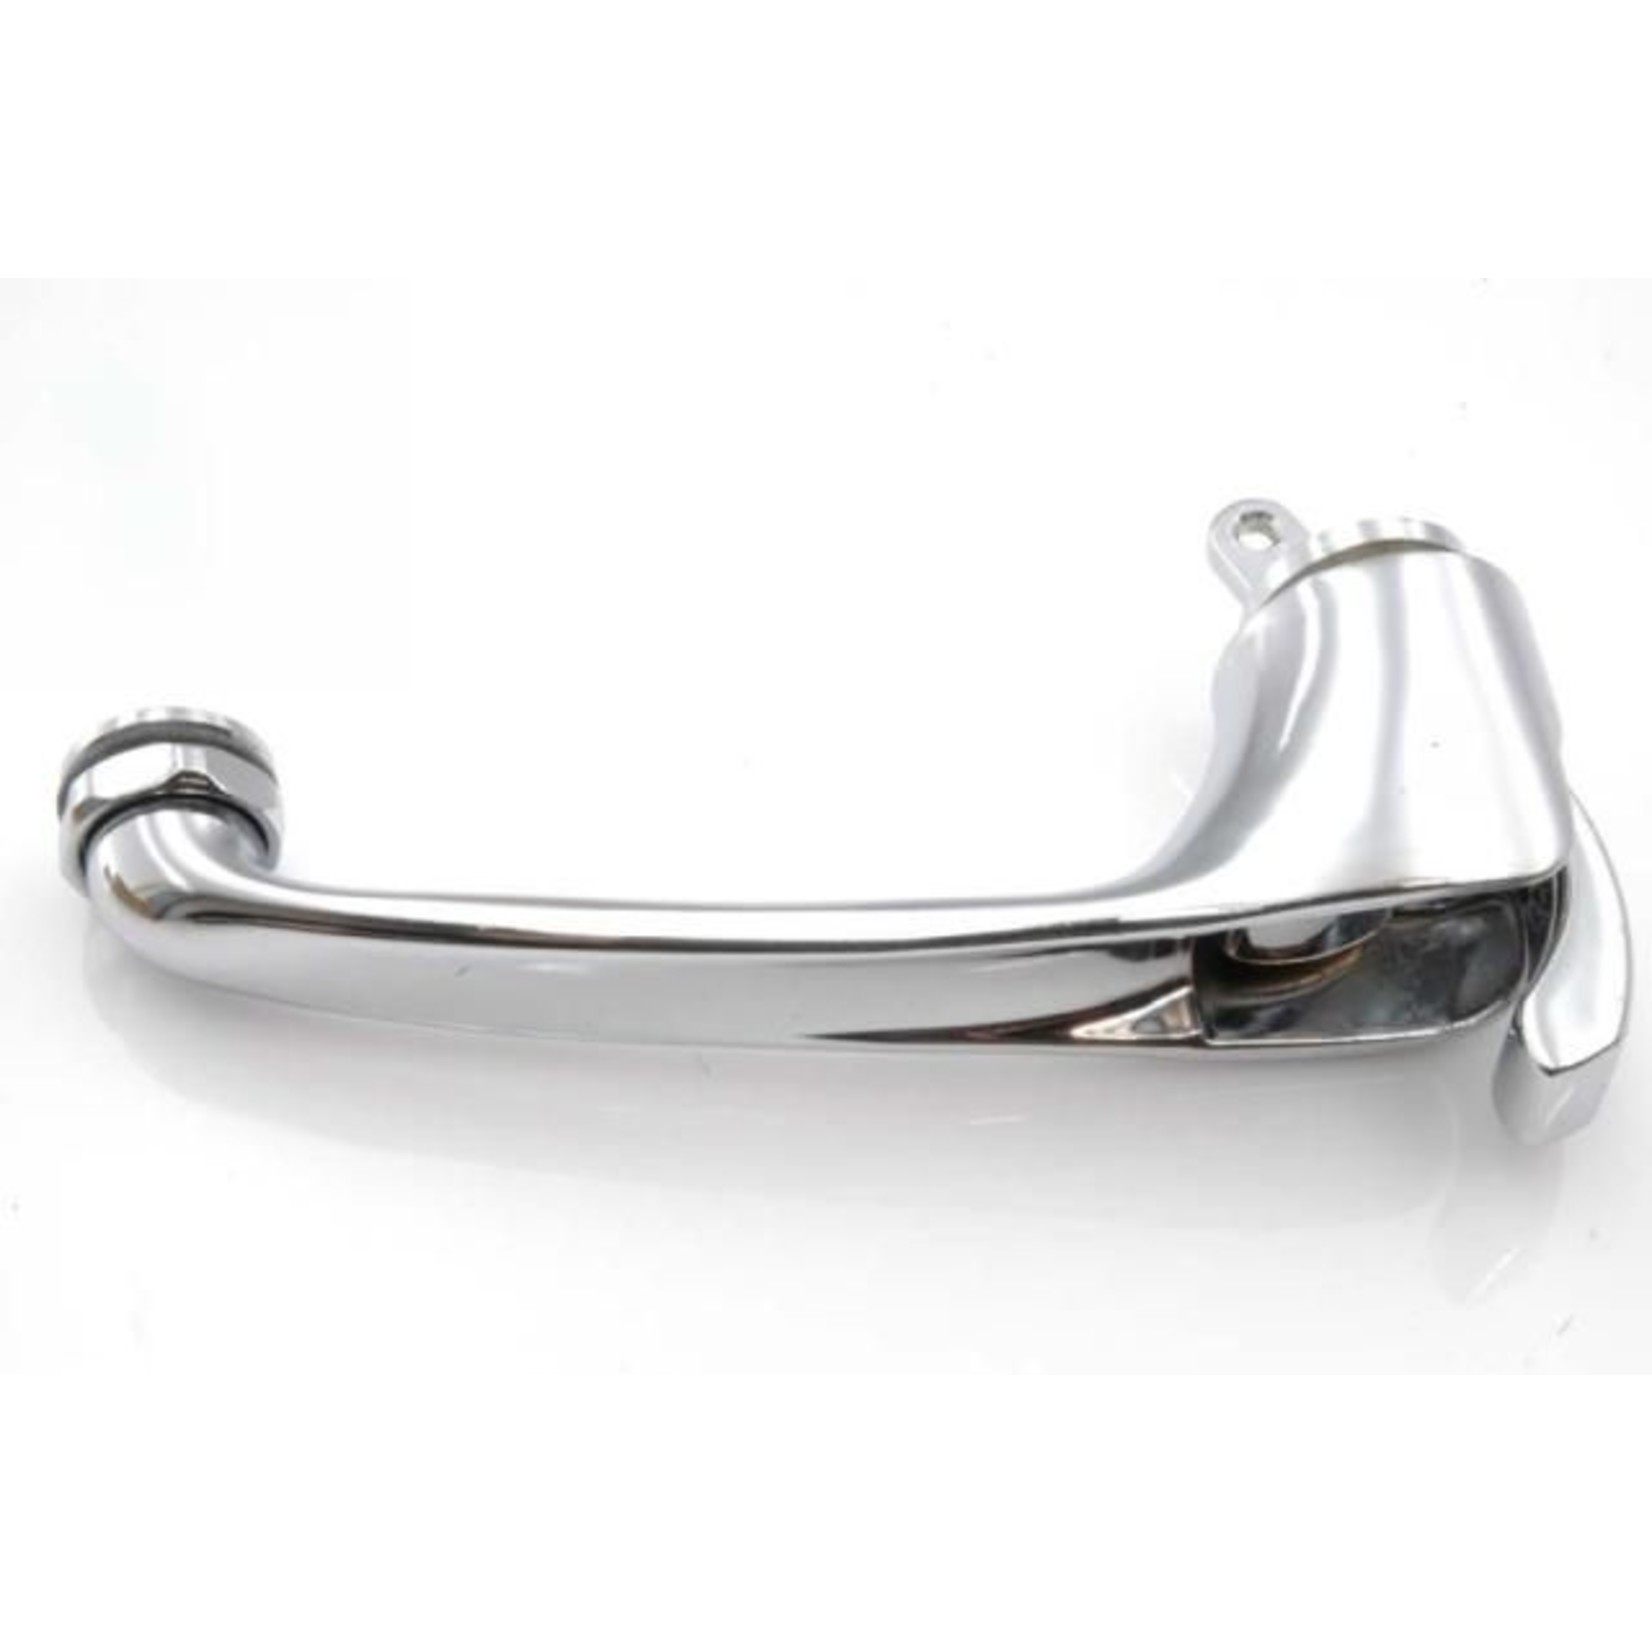 Int handle chrome left tong 90mm Nr Org: 5410627